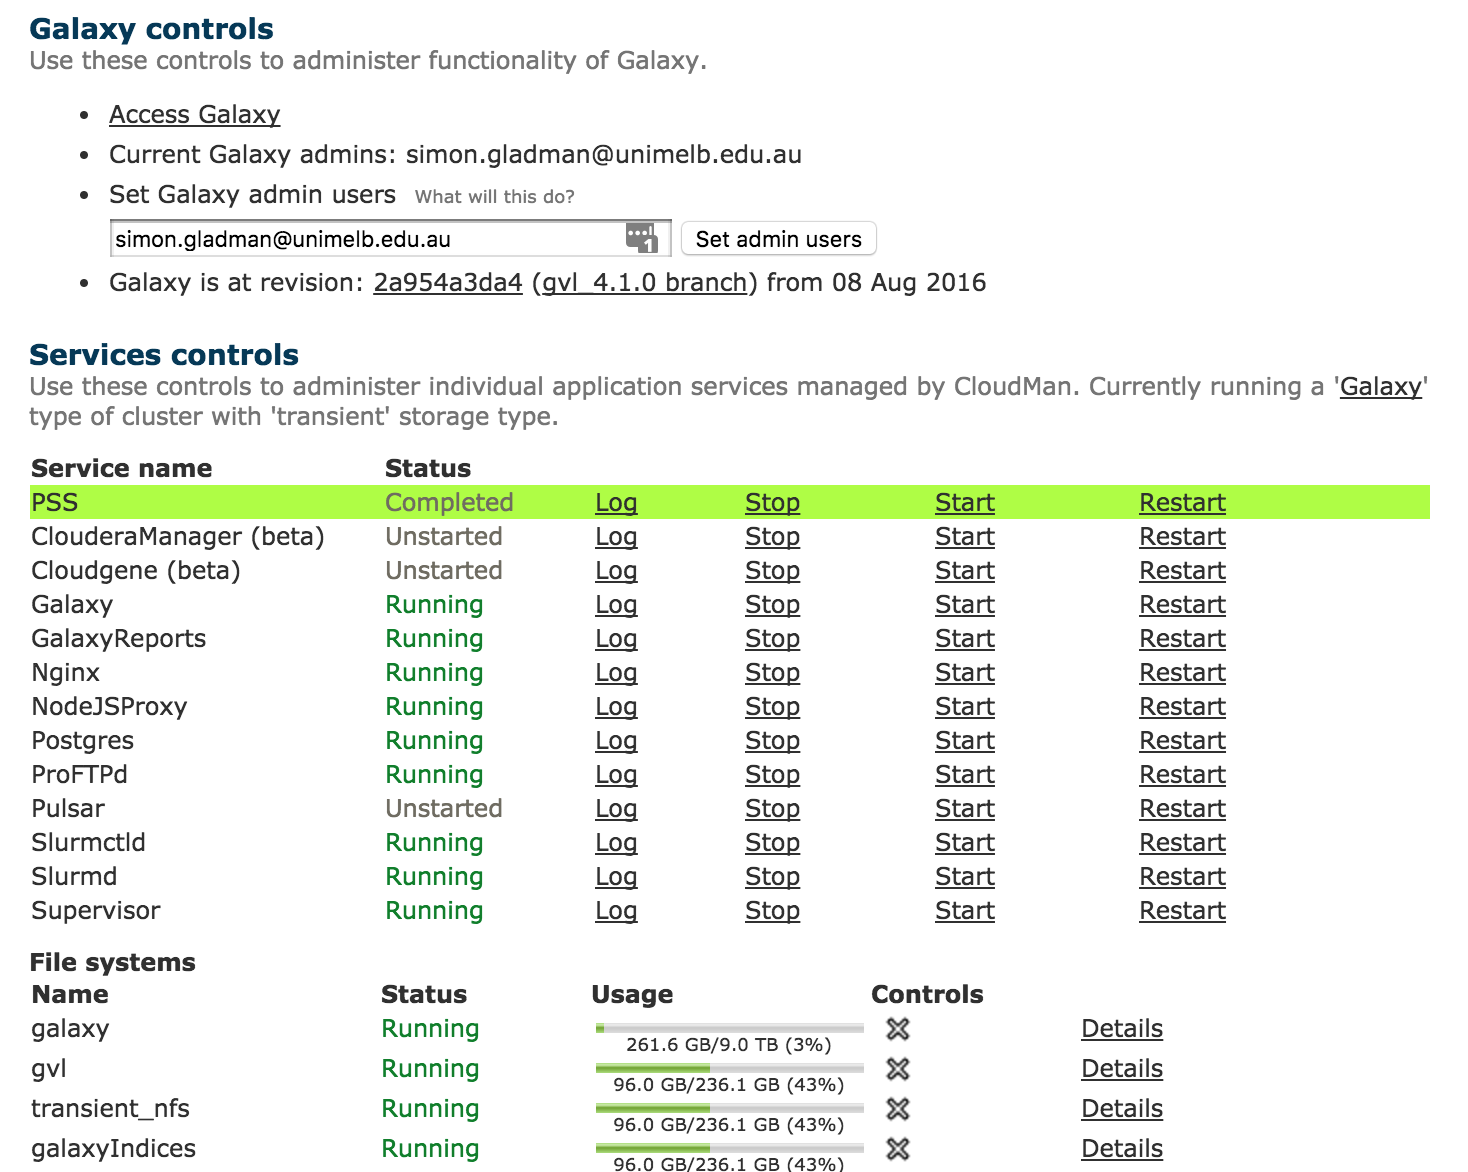 cloudman admin interface showing a list of services which can be started or stopped and their state, like galaxy is running and pulsar is unstarted.